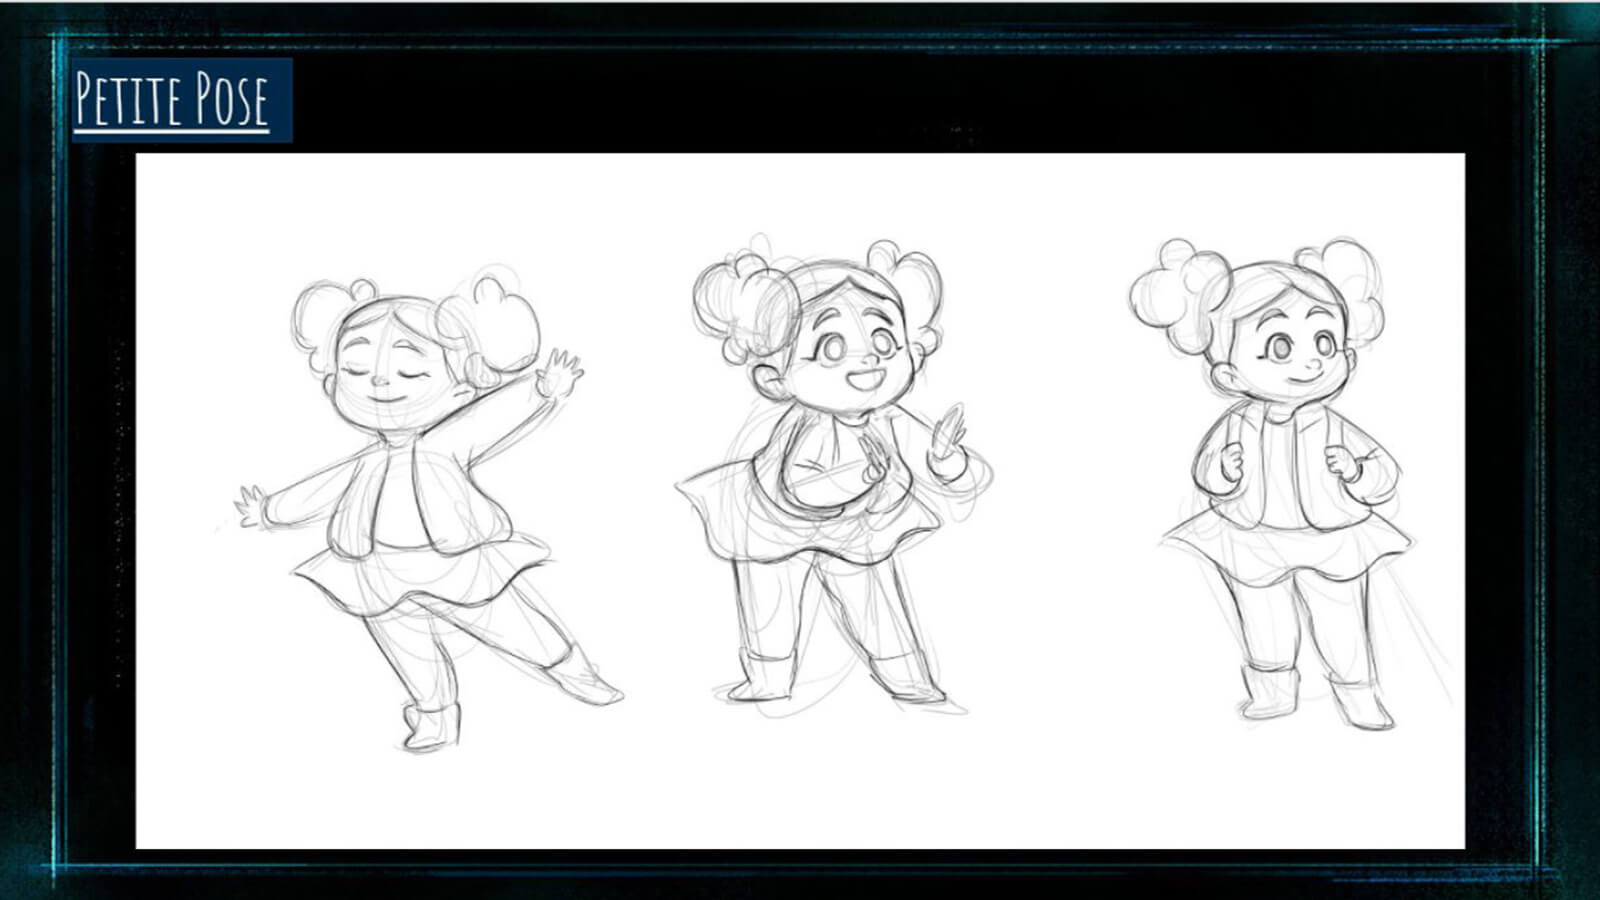 A "Petite Pose" sheet, showing the film's character Petite dancing, clapping, and holding her backpack straps.